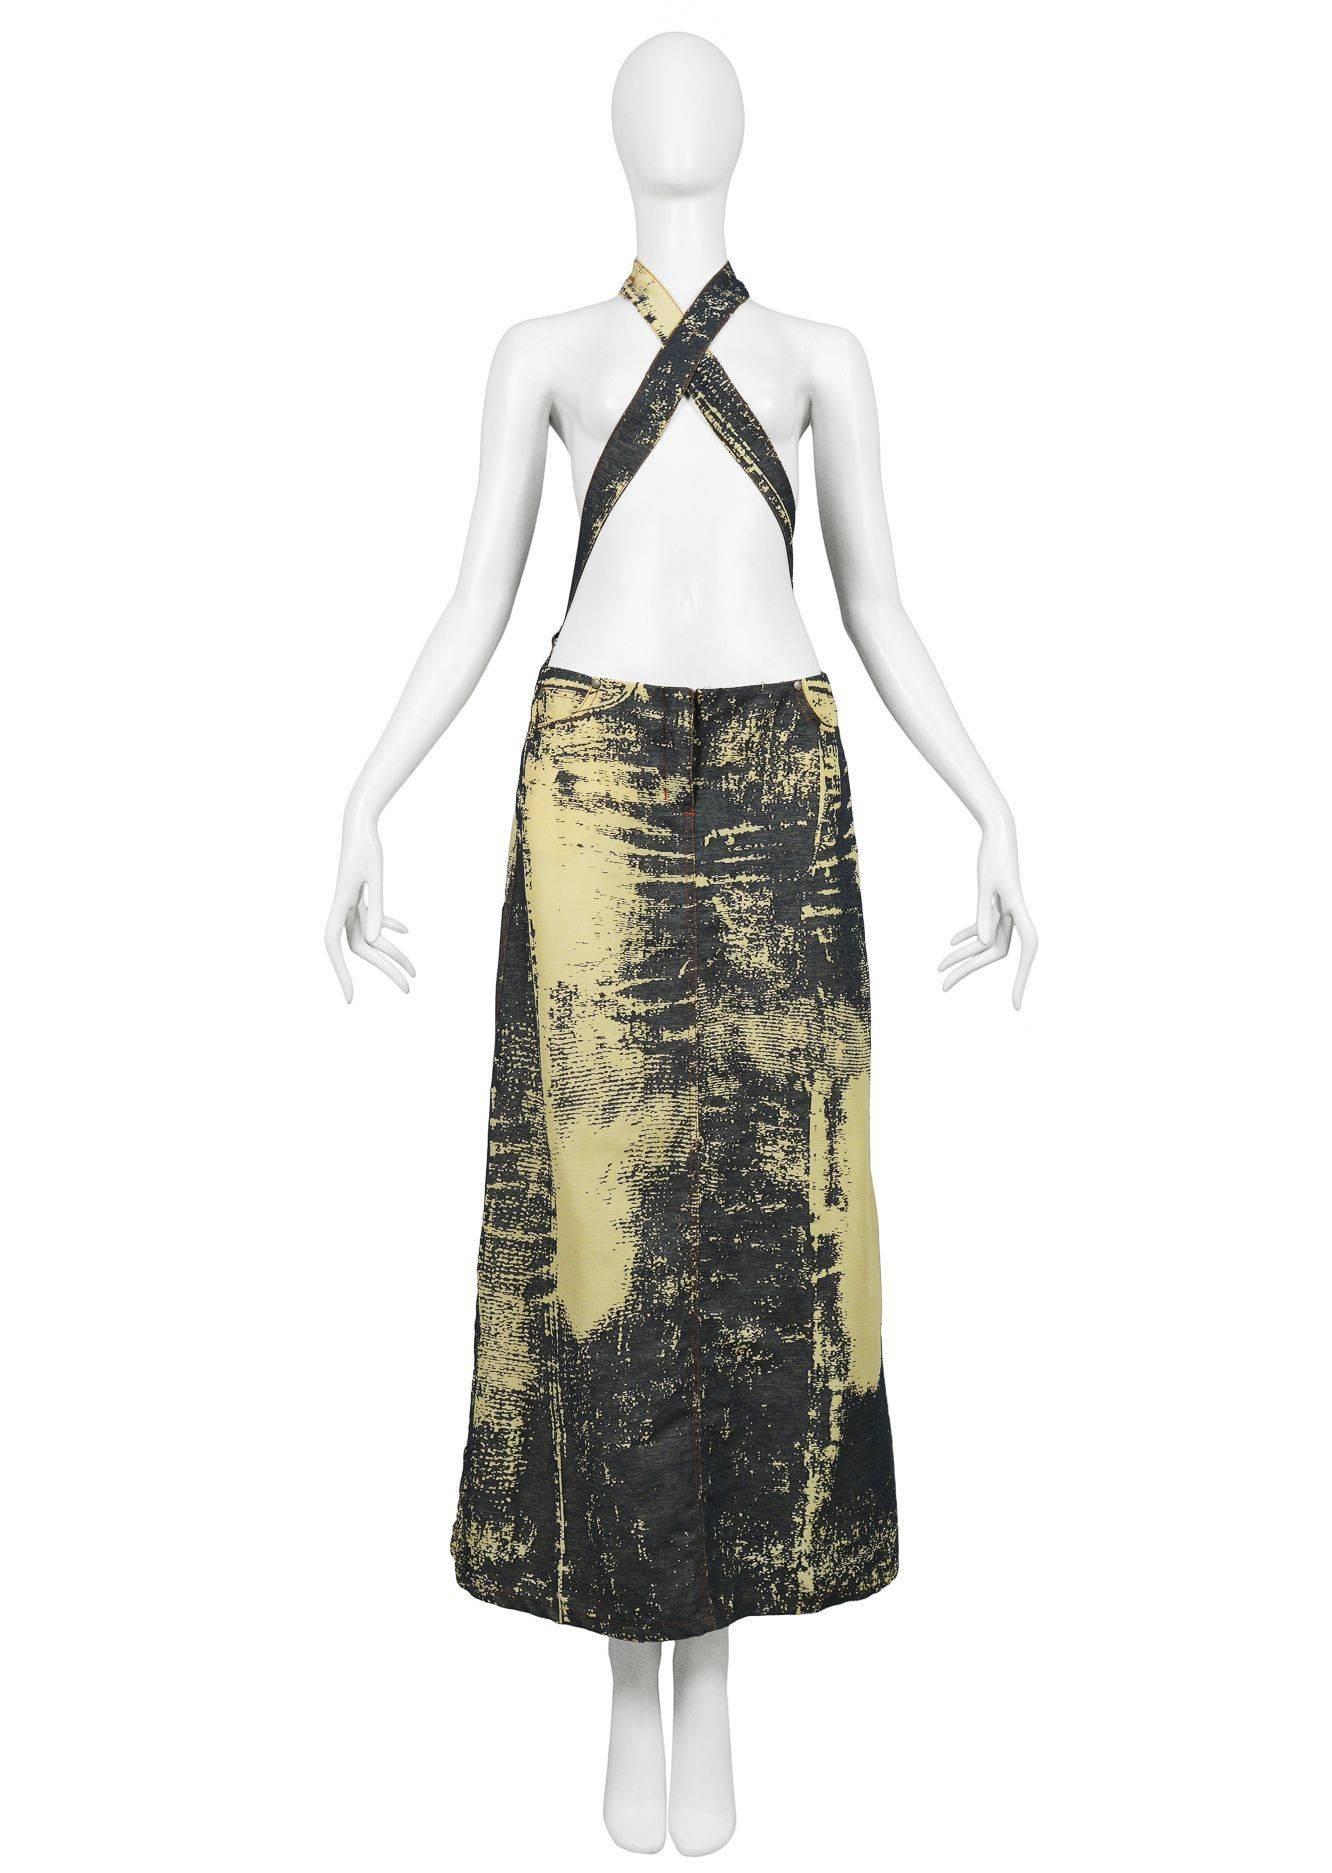 Vintage Jean Paul Gaultier navy and off white Trompe L'oeil printed skirt with suspenders.